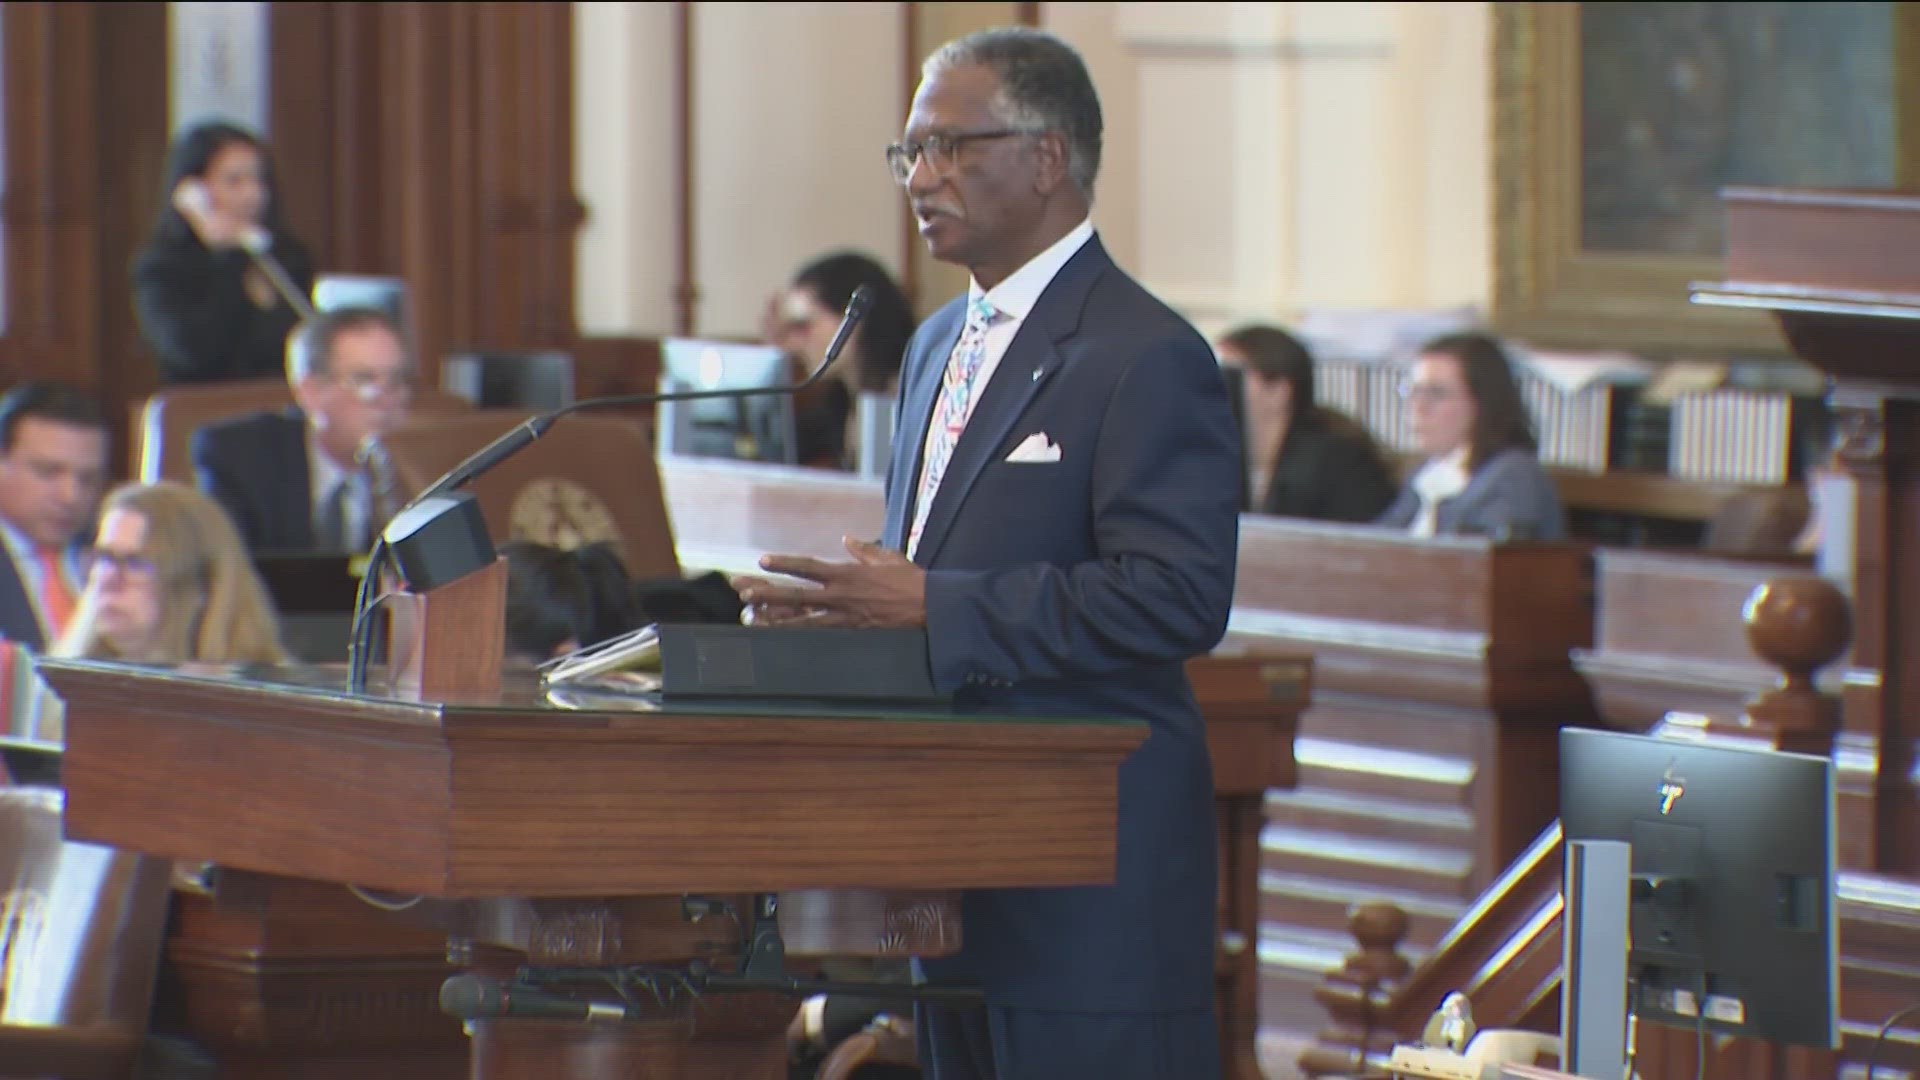 On Wednesday, the Texas House voted on two major bills related to teacher pay and retention. KVUE's Isabella Basco has the details.